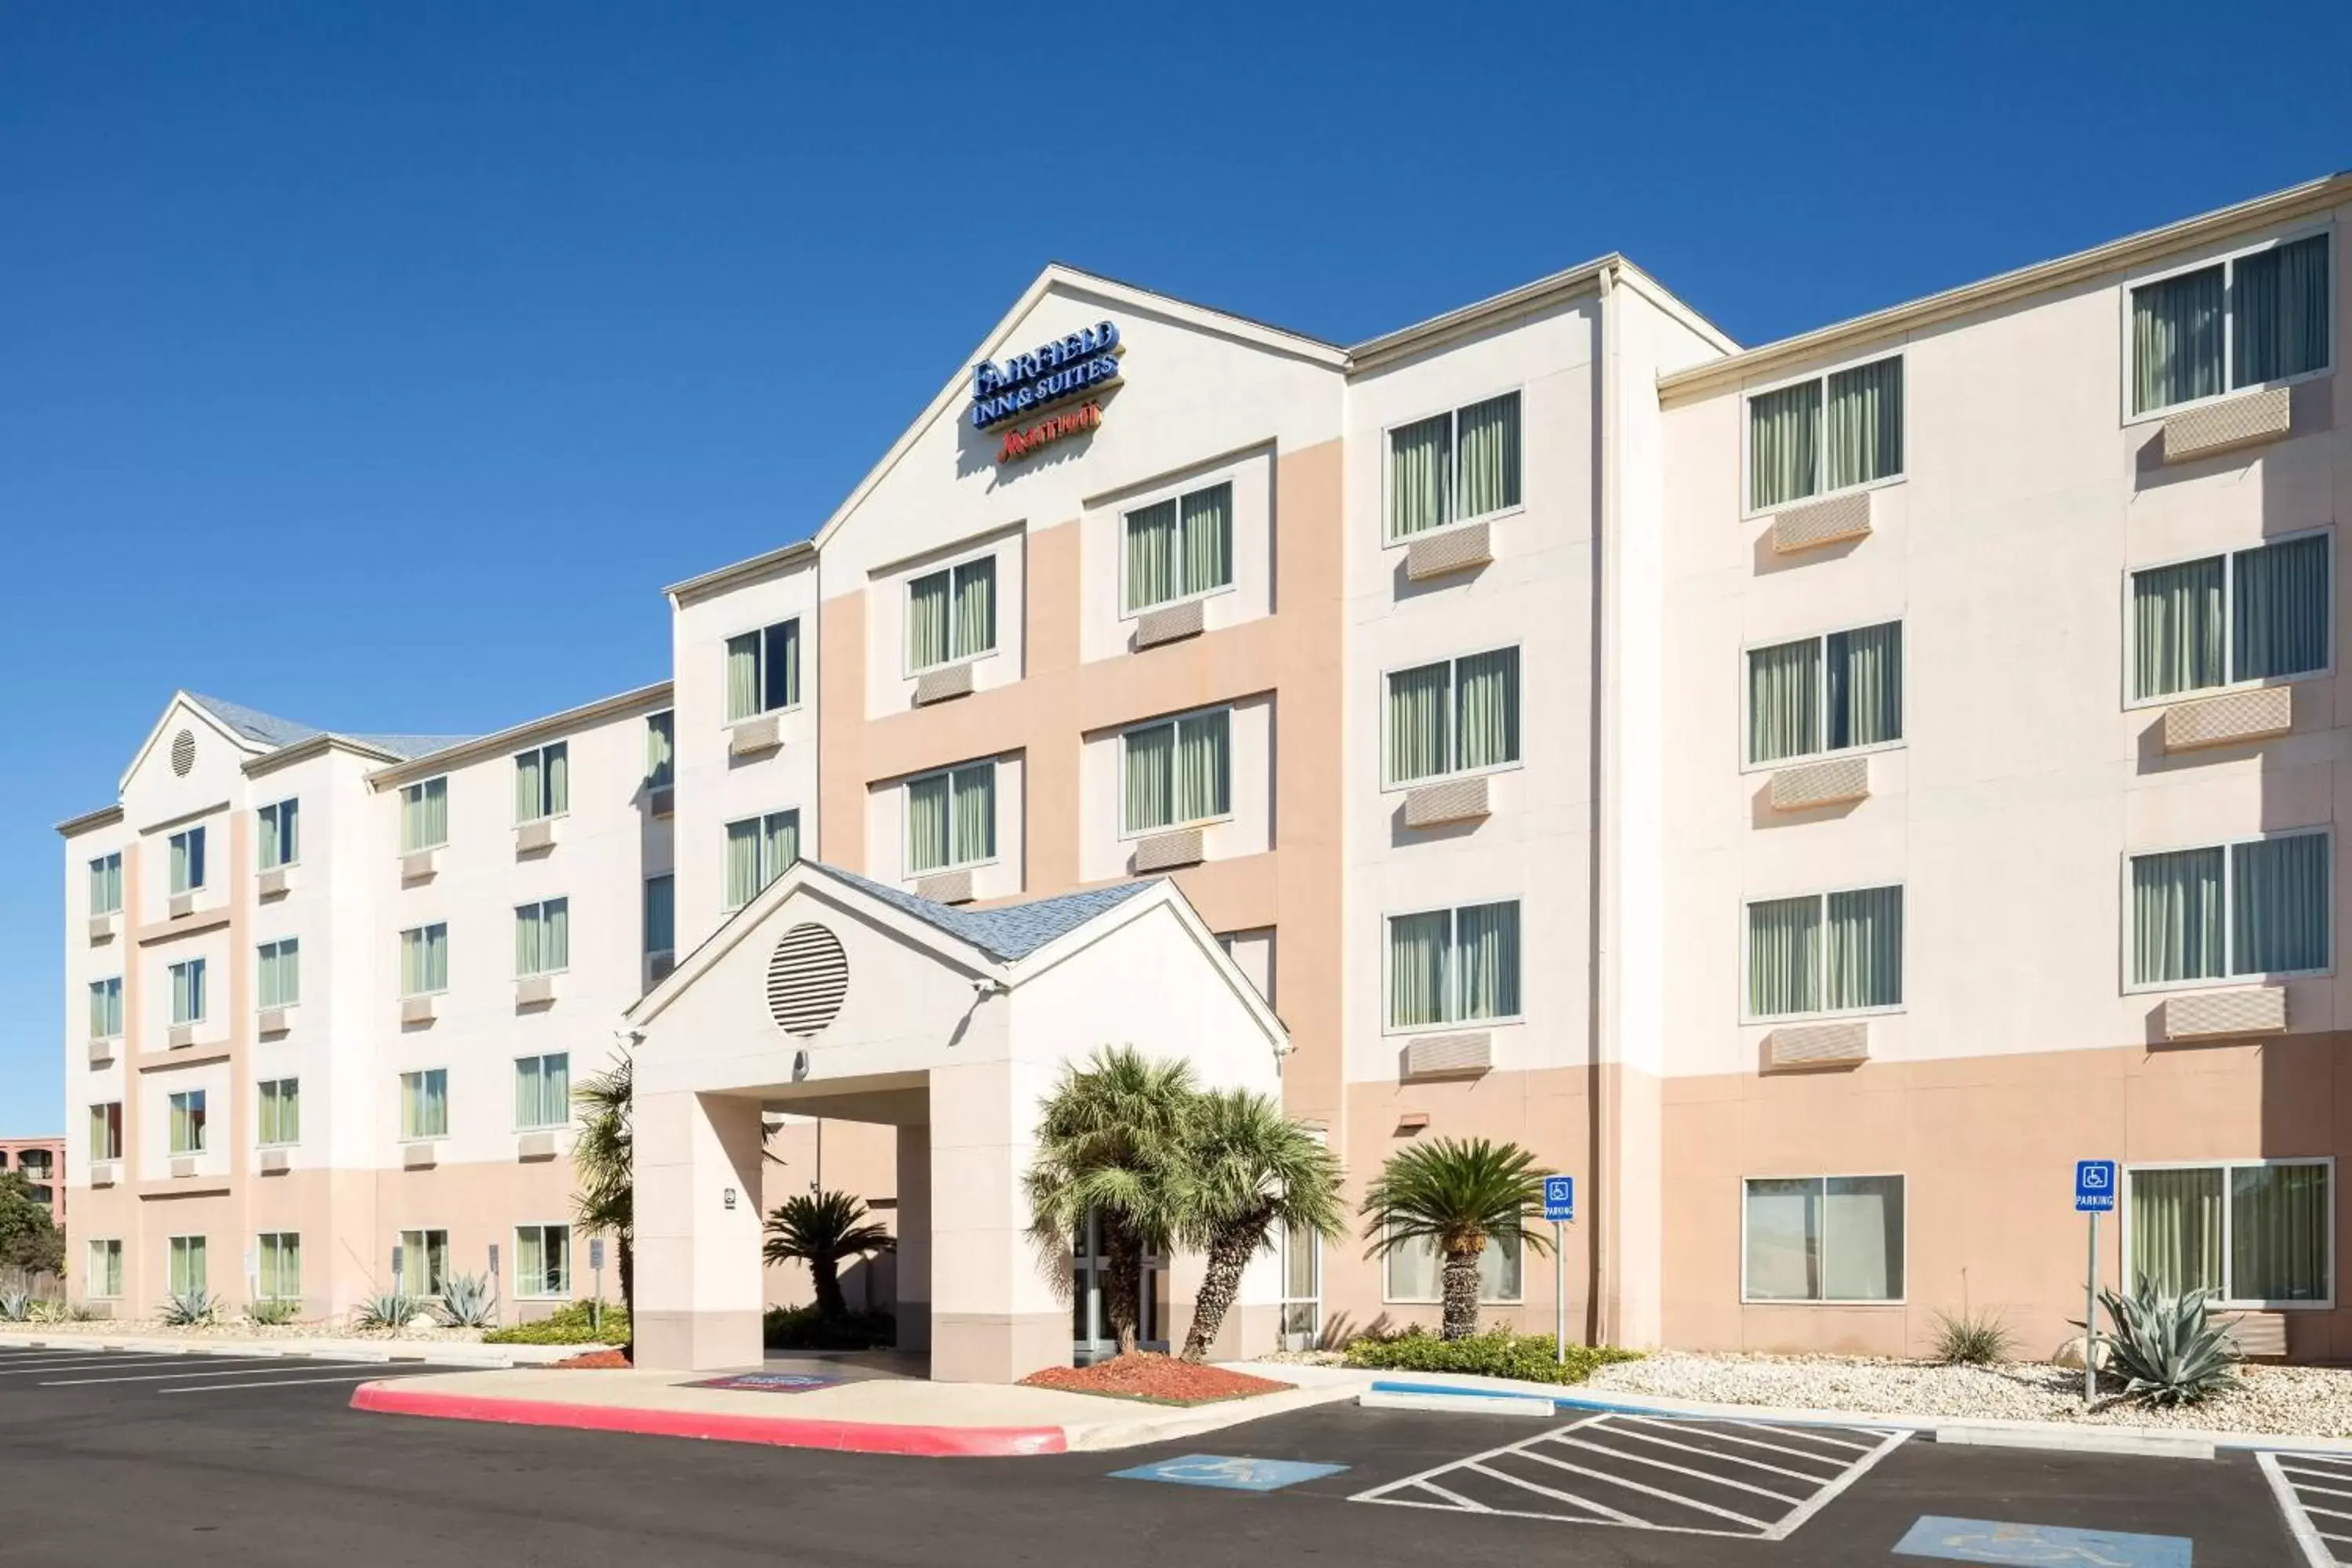 Property Building in Fairfield Inn & Suites by Marriott San Antonio Downtown/Market Square